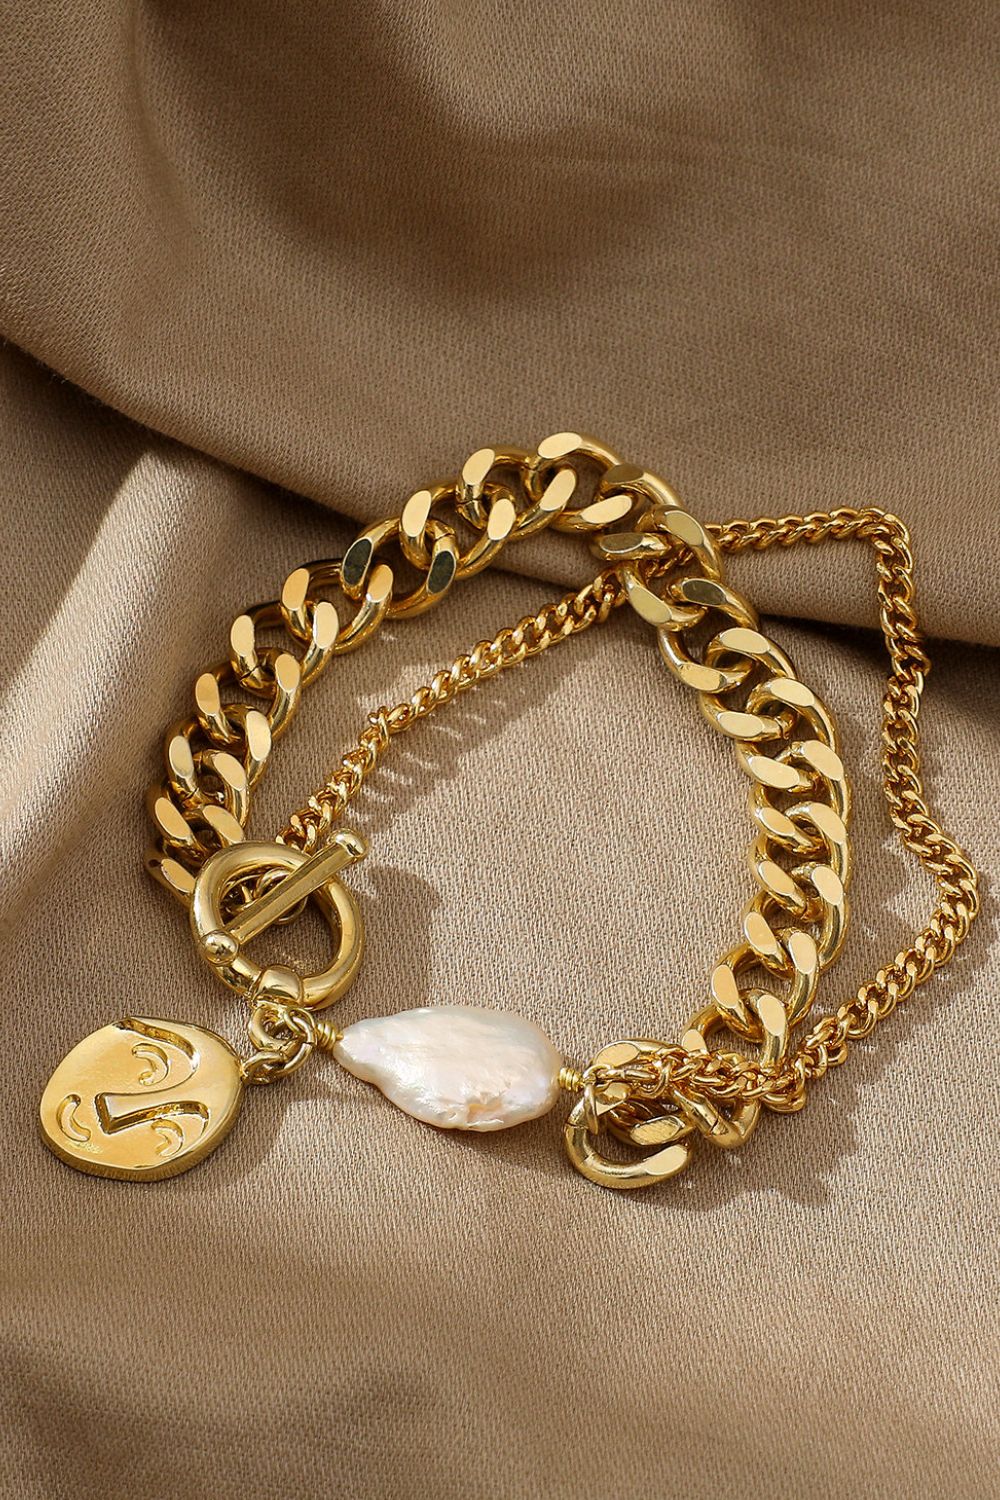 Gold Chain & Pearl Bracelet - Cheeky Chic Boutique